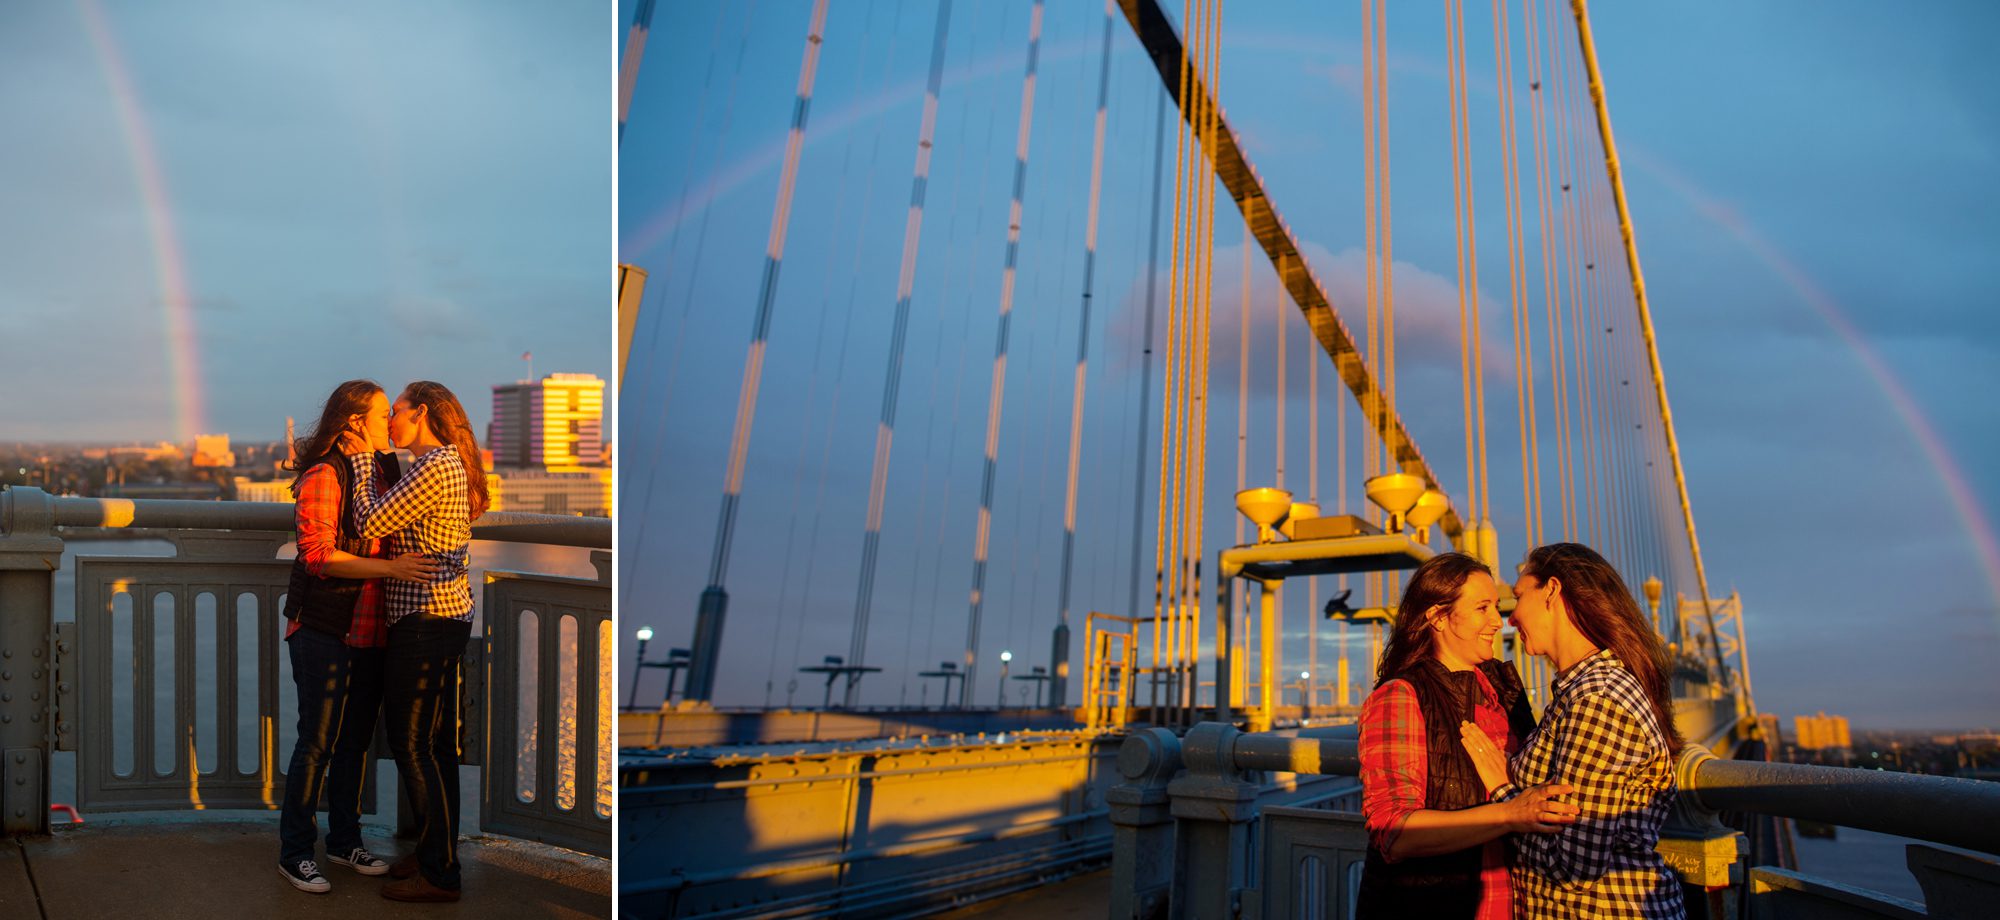 Engagement Photos with Rainbow